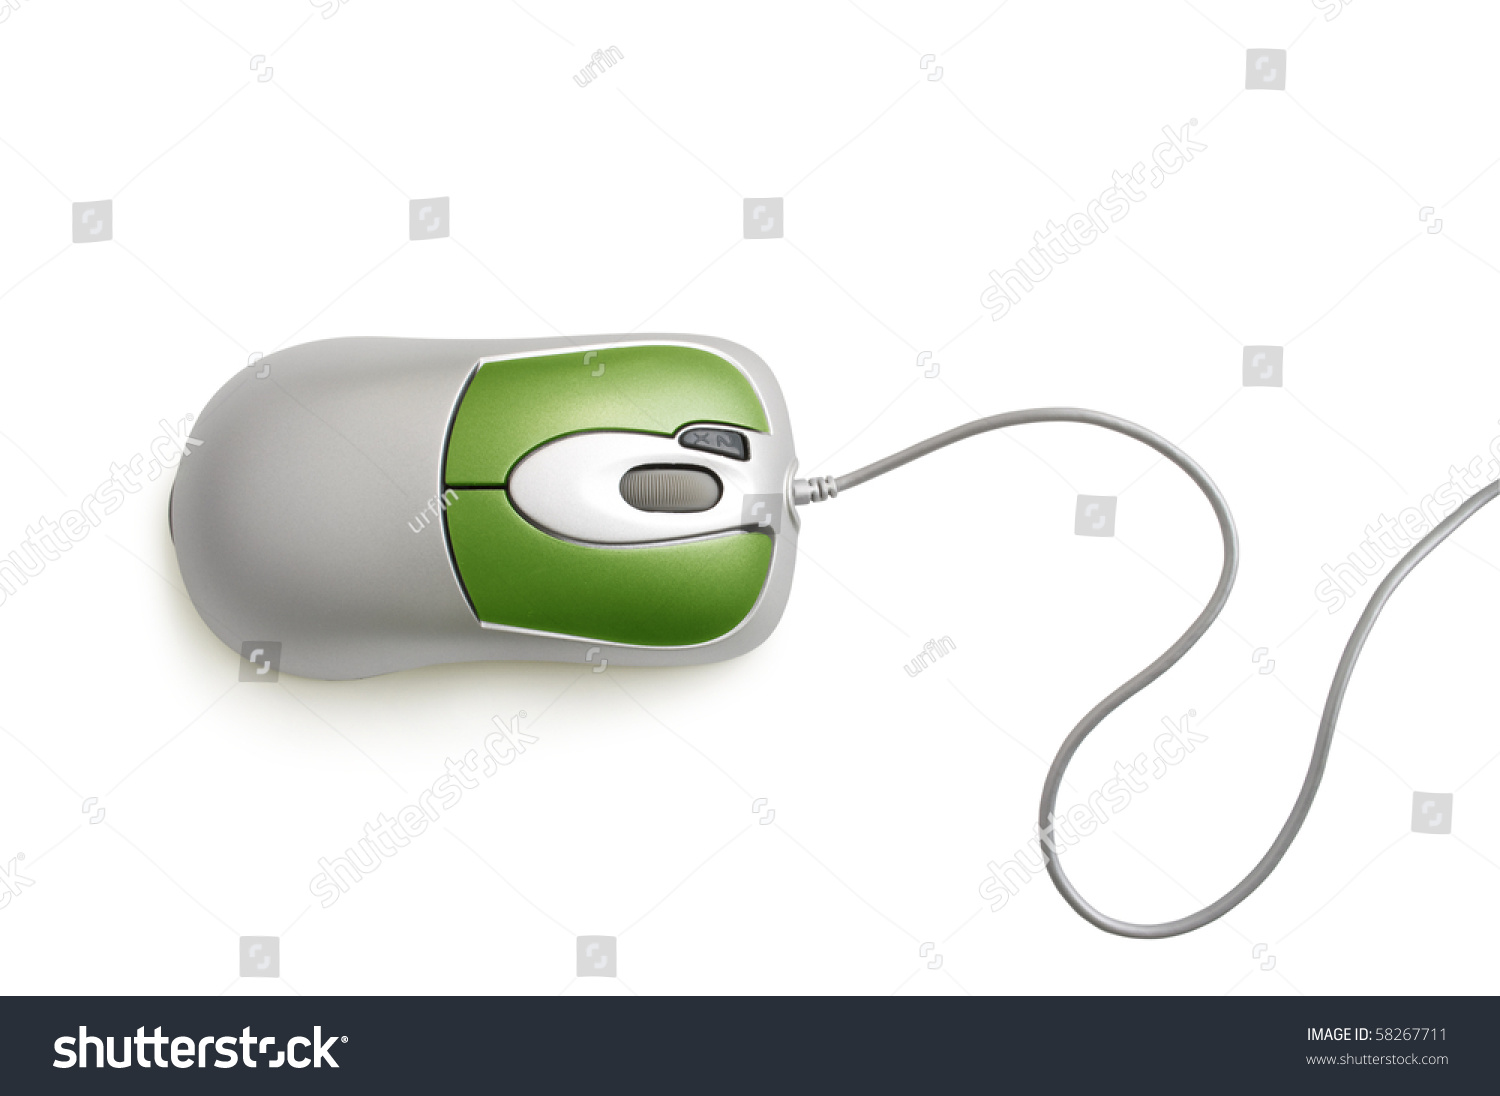 computer mouse isolated on white #58267711